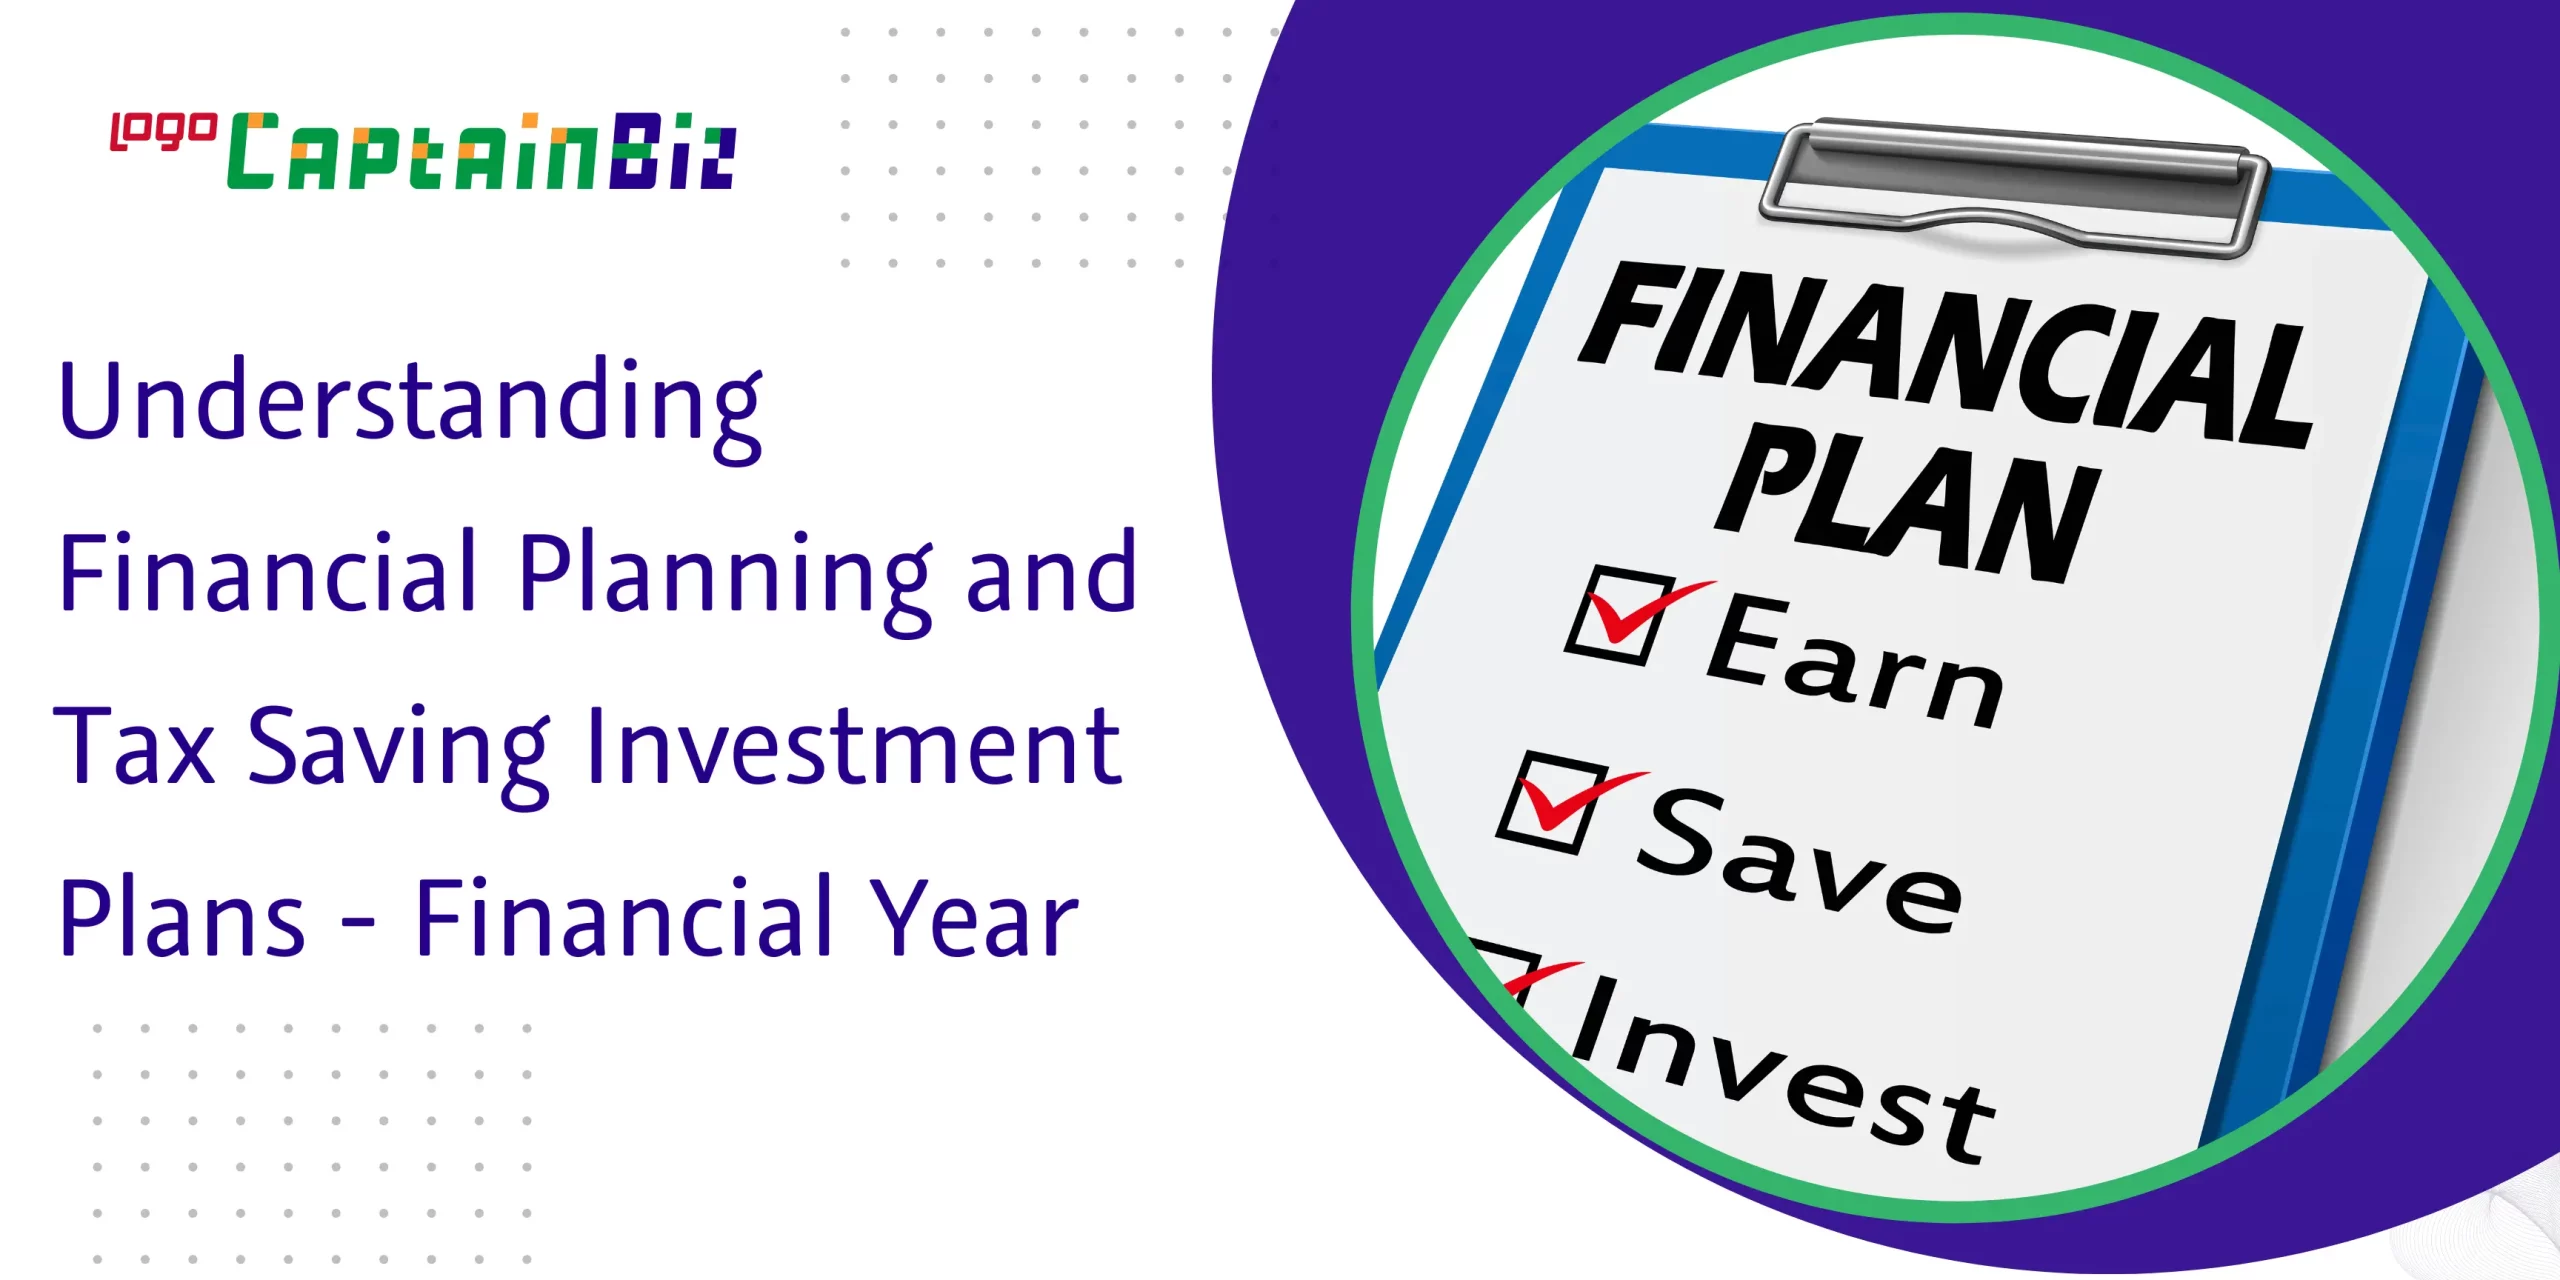 CaptainBiz: understanding financial planning and tax saving investment plans - financial year